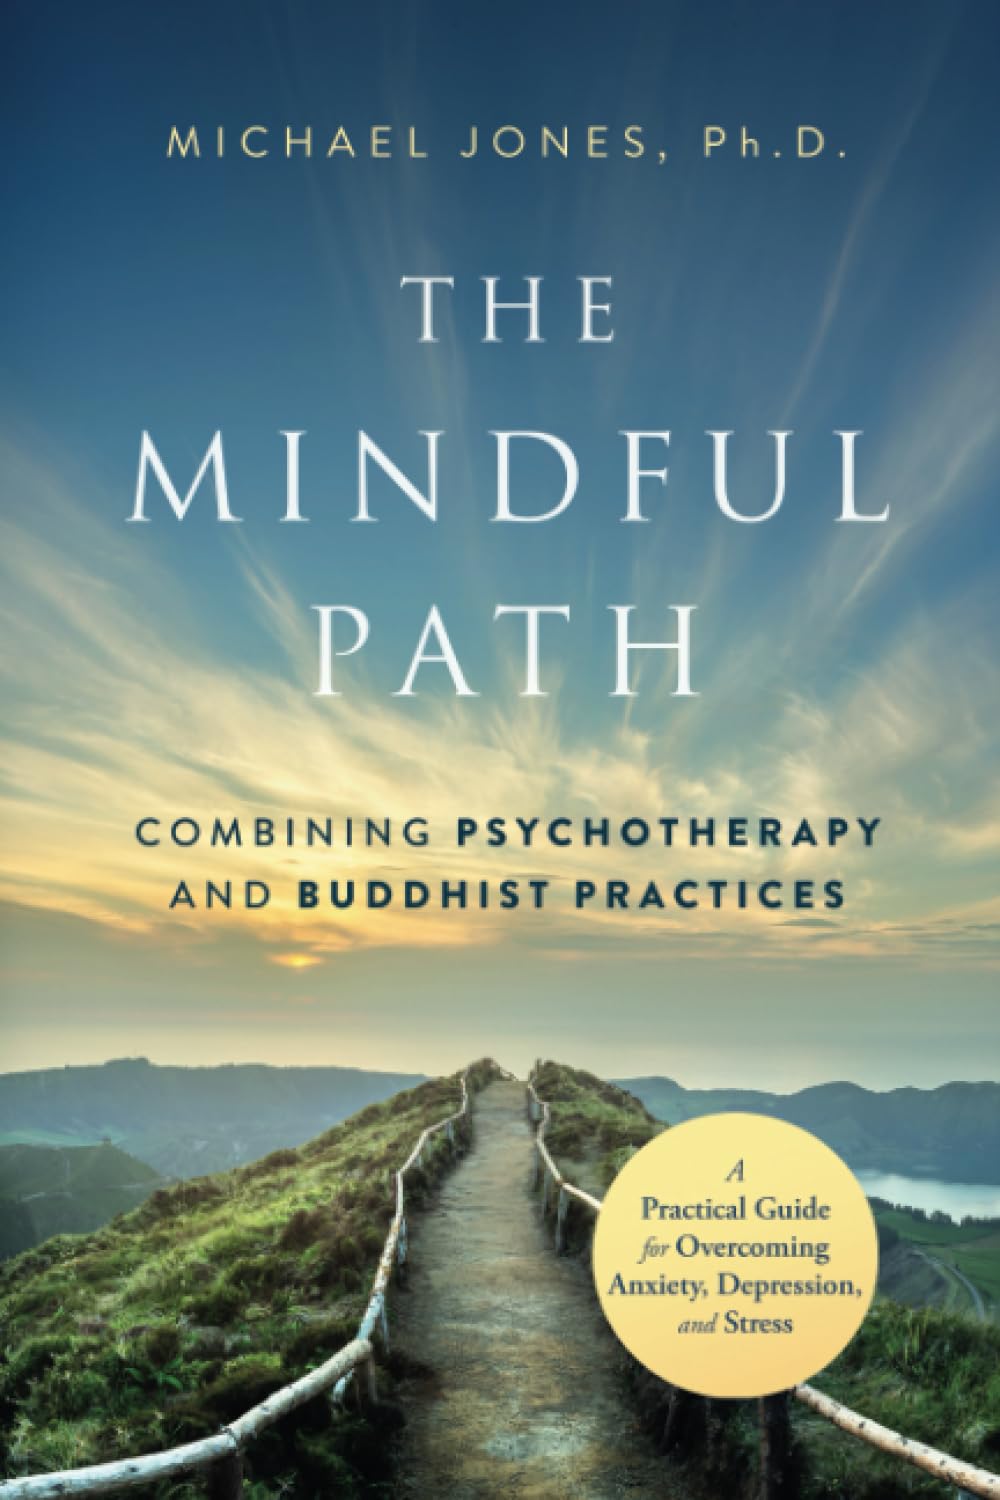 The Mindful Path: Combining Psychotherapy and Buddhist Practices: A Practical Guide for Anxiety, Depression, and Stress